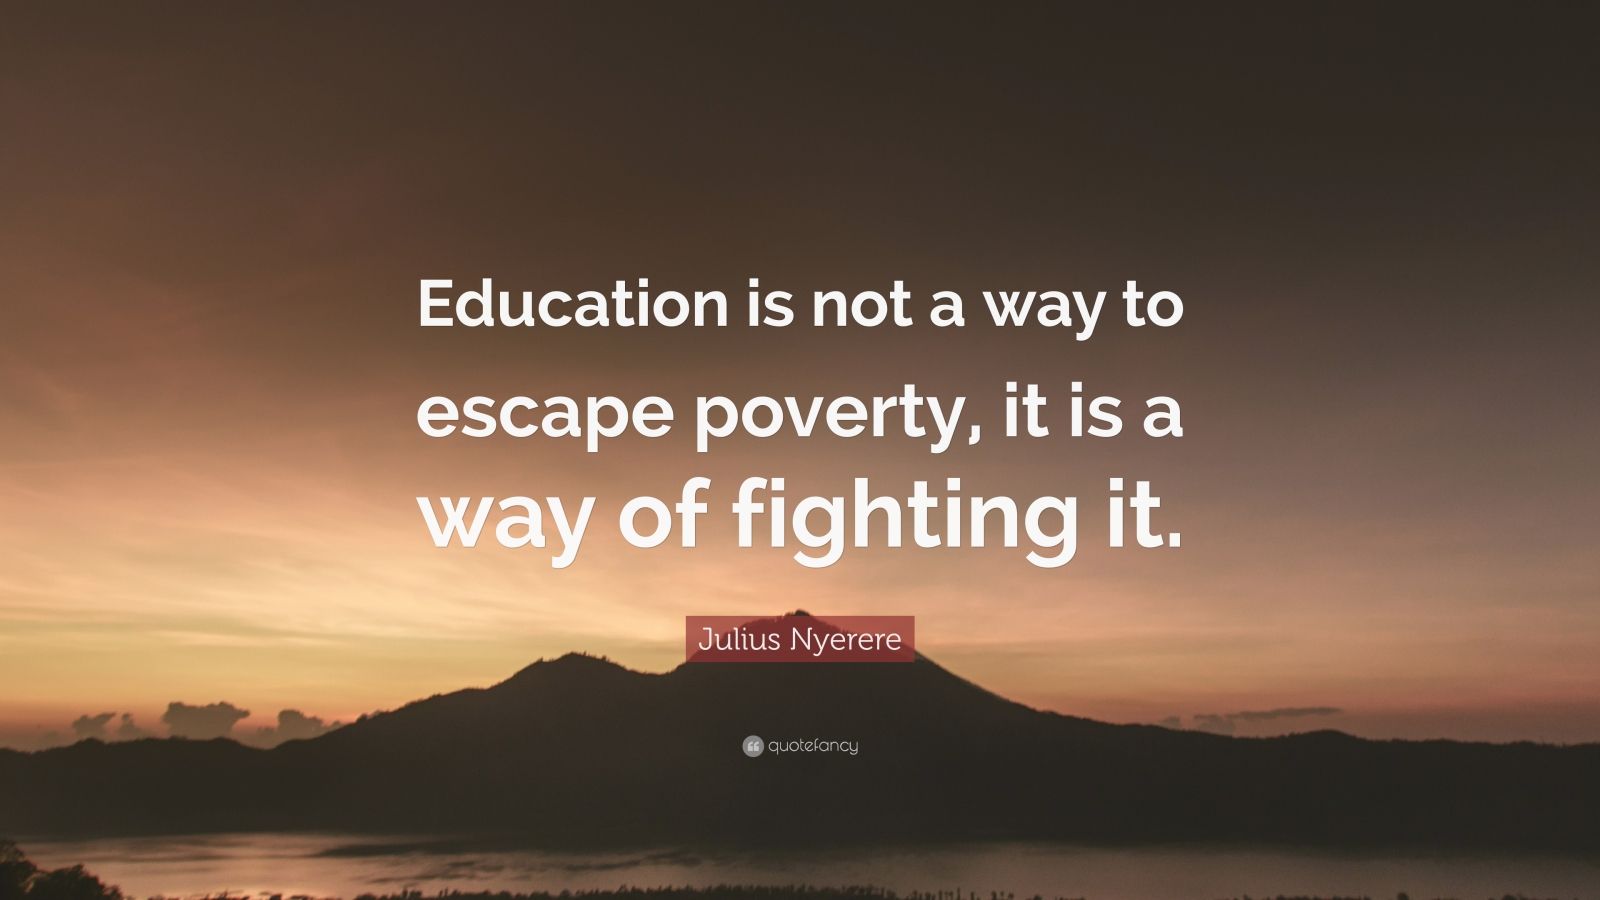 Julius Nyerere Quote: “Education is not a way to escape poverty, it is